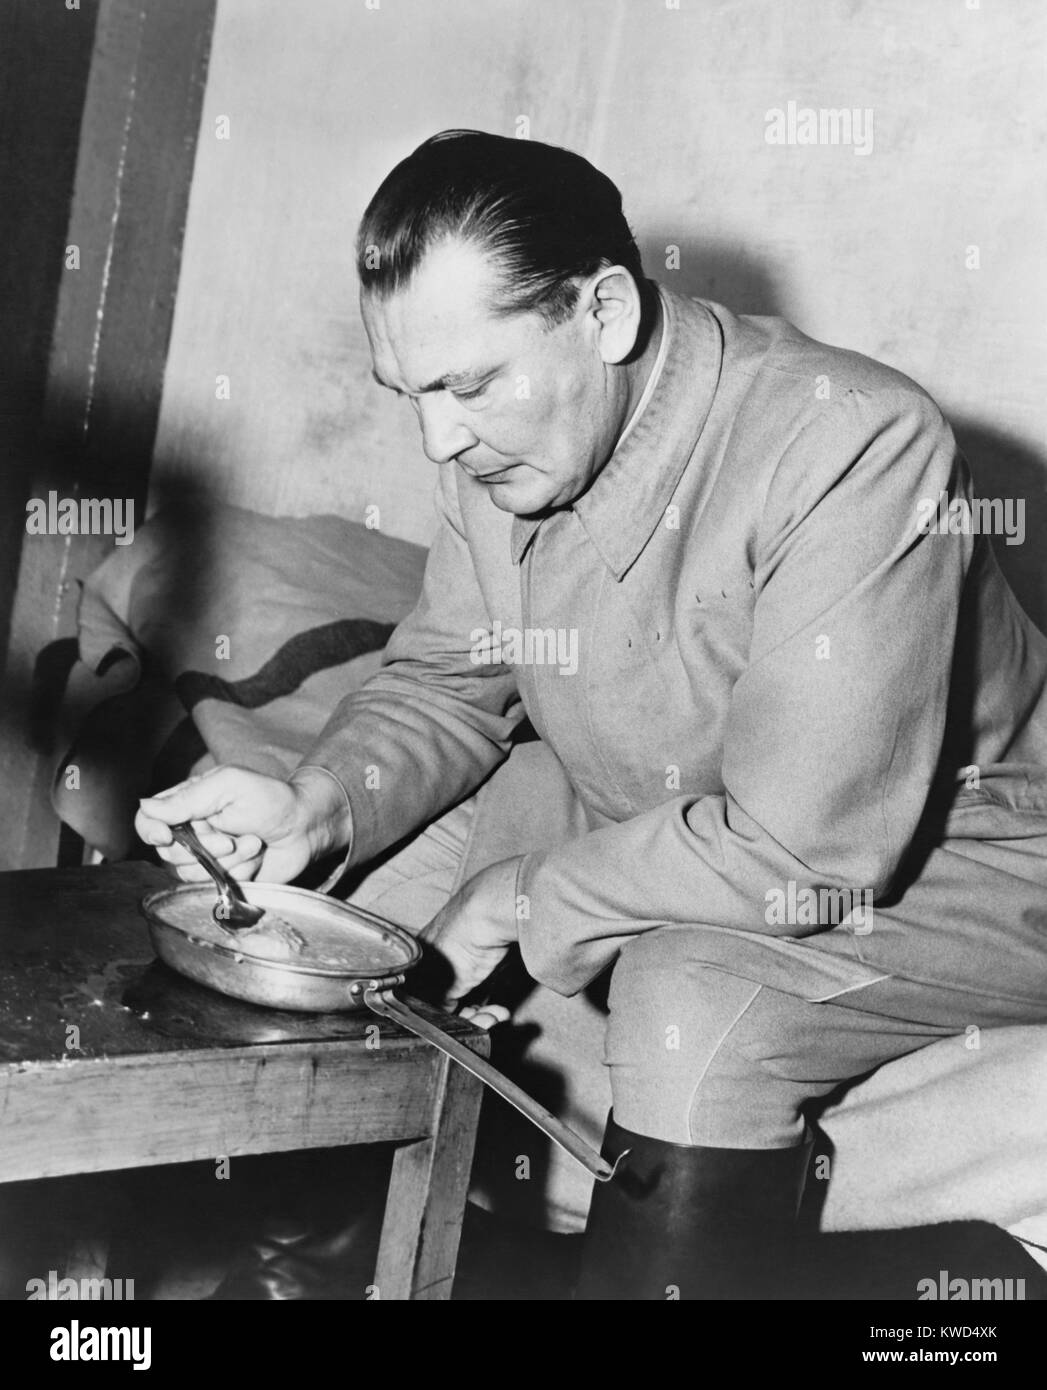 War criminal Hermann Goering eating gruel from a metal pan in prison. He was the highest ranking Nazi to be convicted at the Nuremberg Trials. Nov. 1945-Oct. 1946. (BSLOC 2014 13 2) Stock Photo